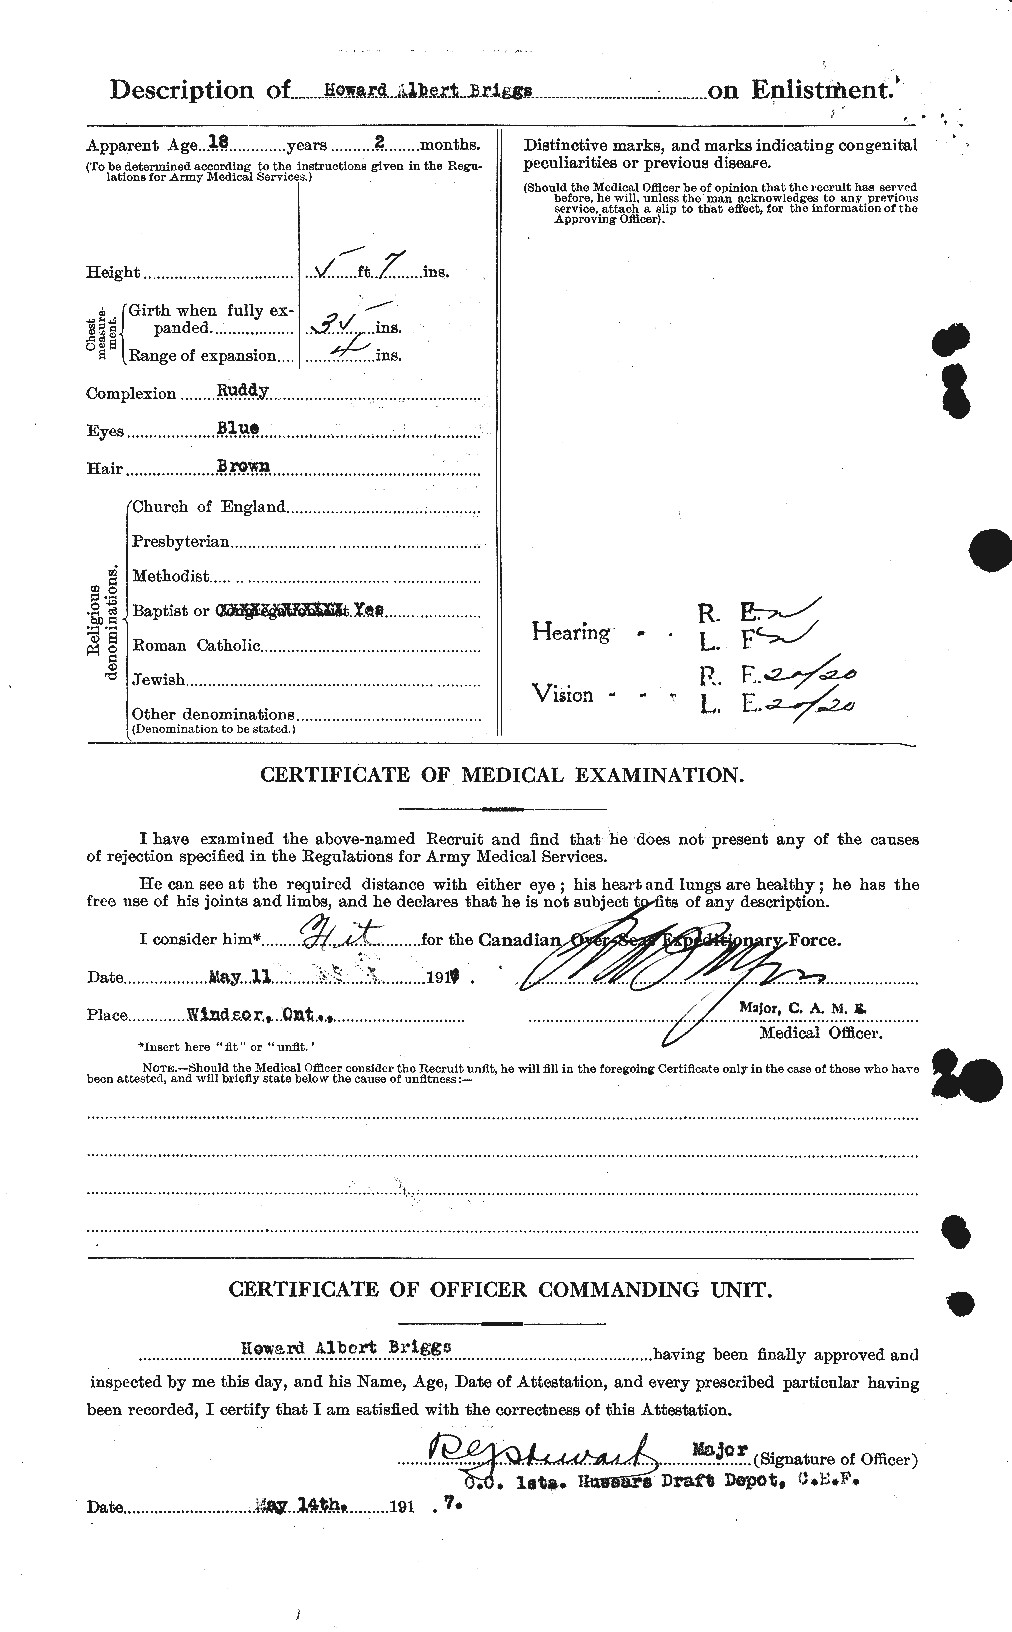 Personnel Records of the First World War - CEF 264034b